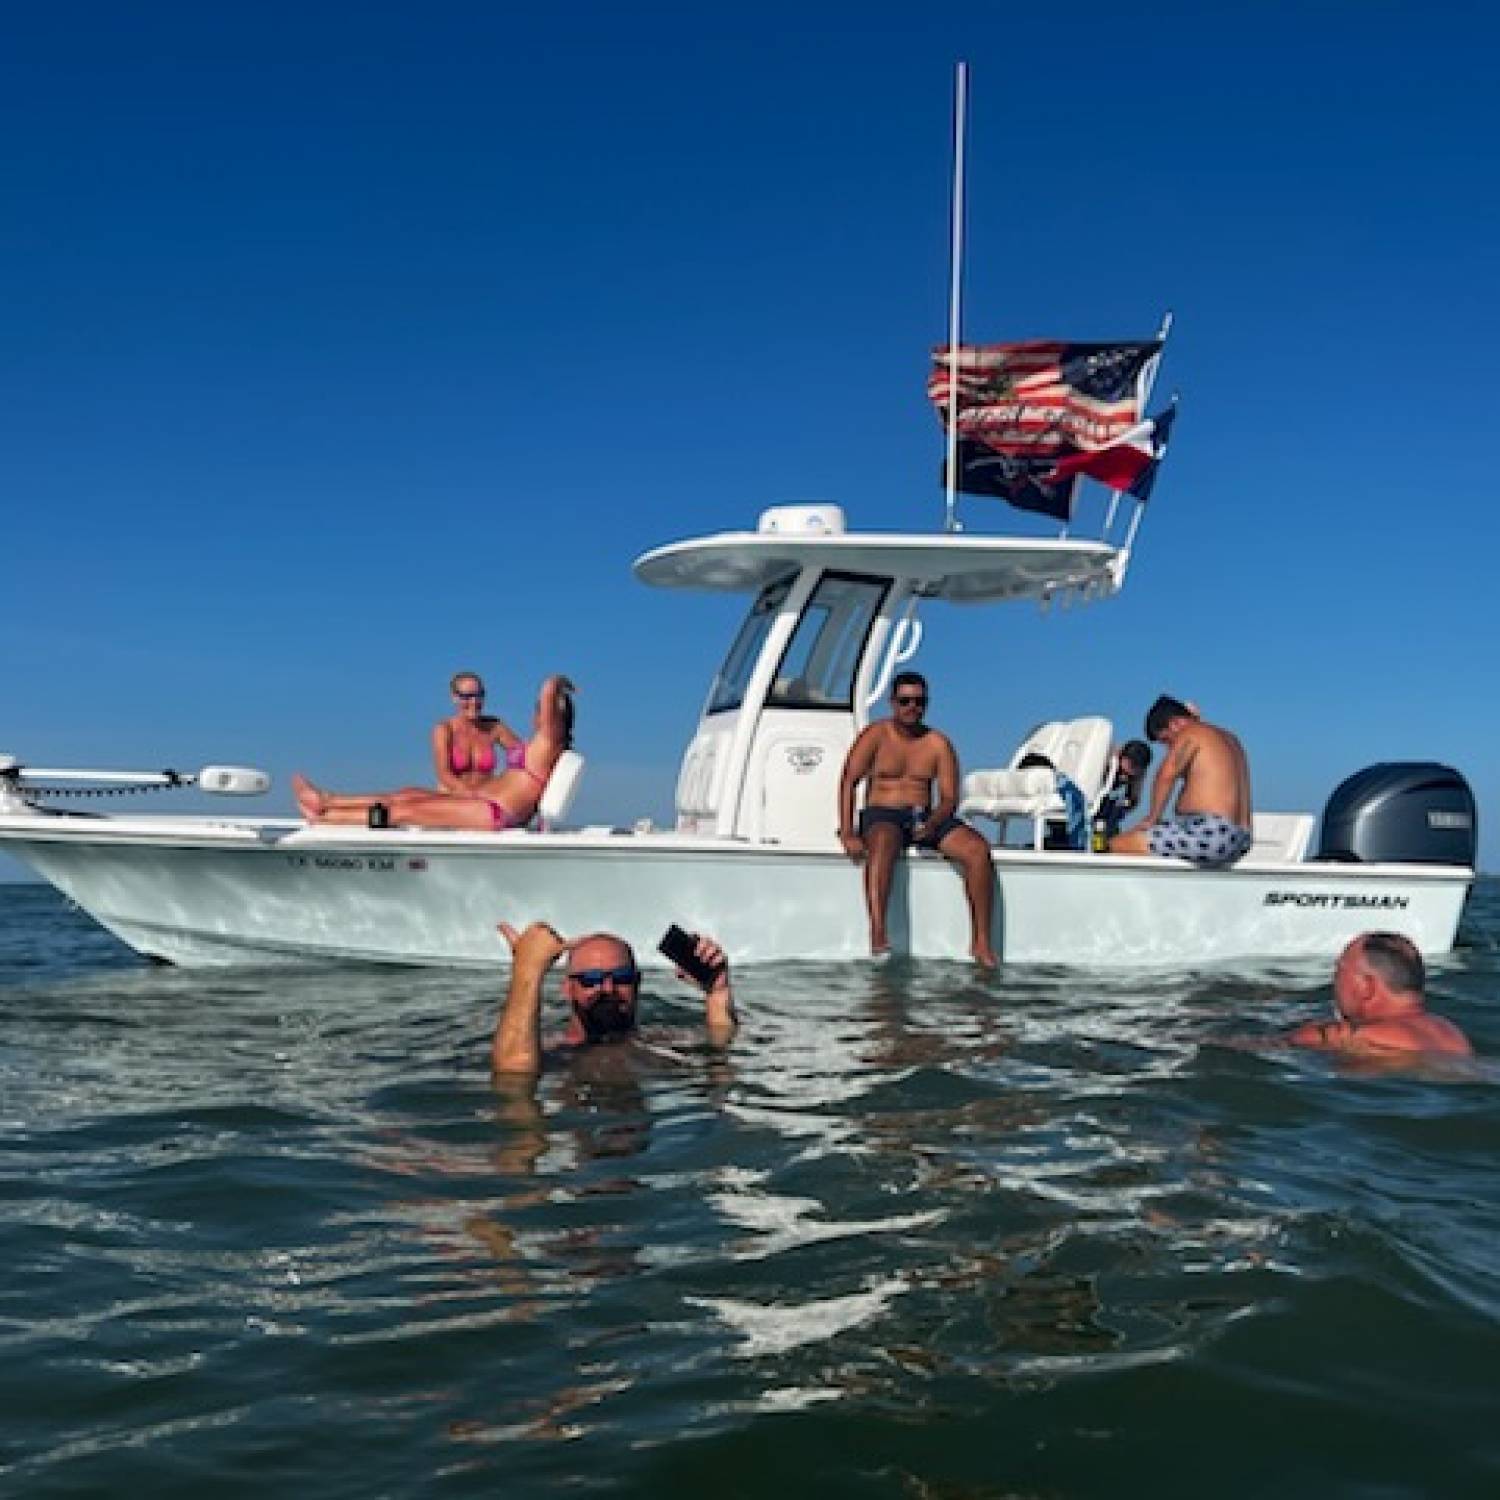 Title: Enjoying time with friends - On board their Sportsman Masters 247 Bay Boat - Location: Jamiaca Beach, Tx. Participating in the Photo Contest #SportsmanJuly